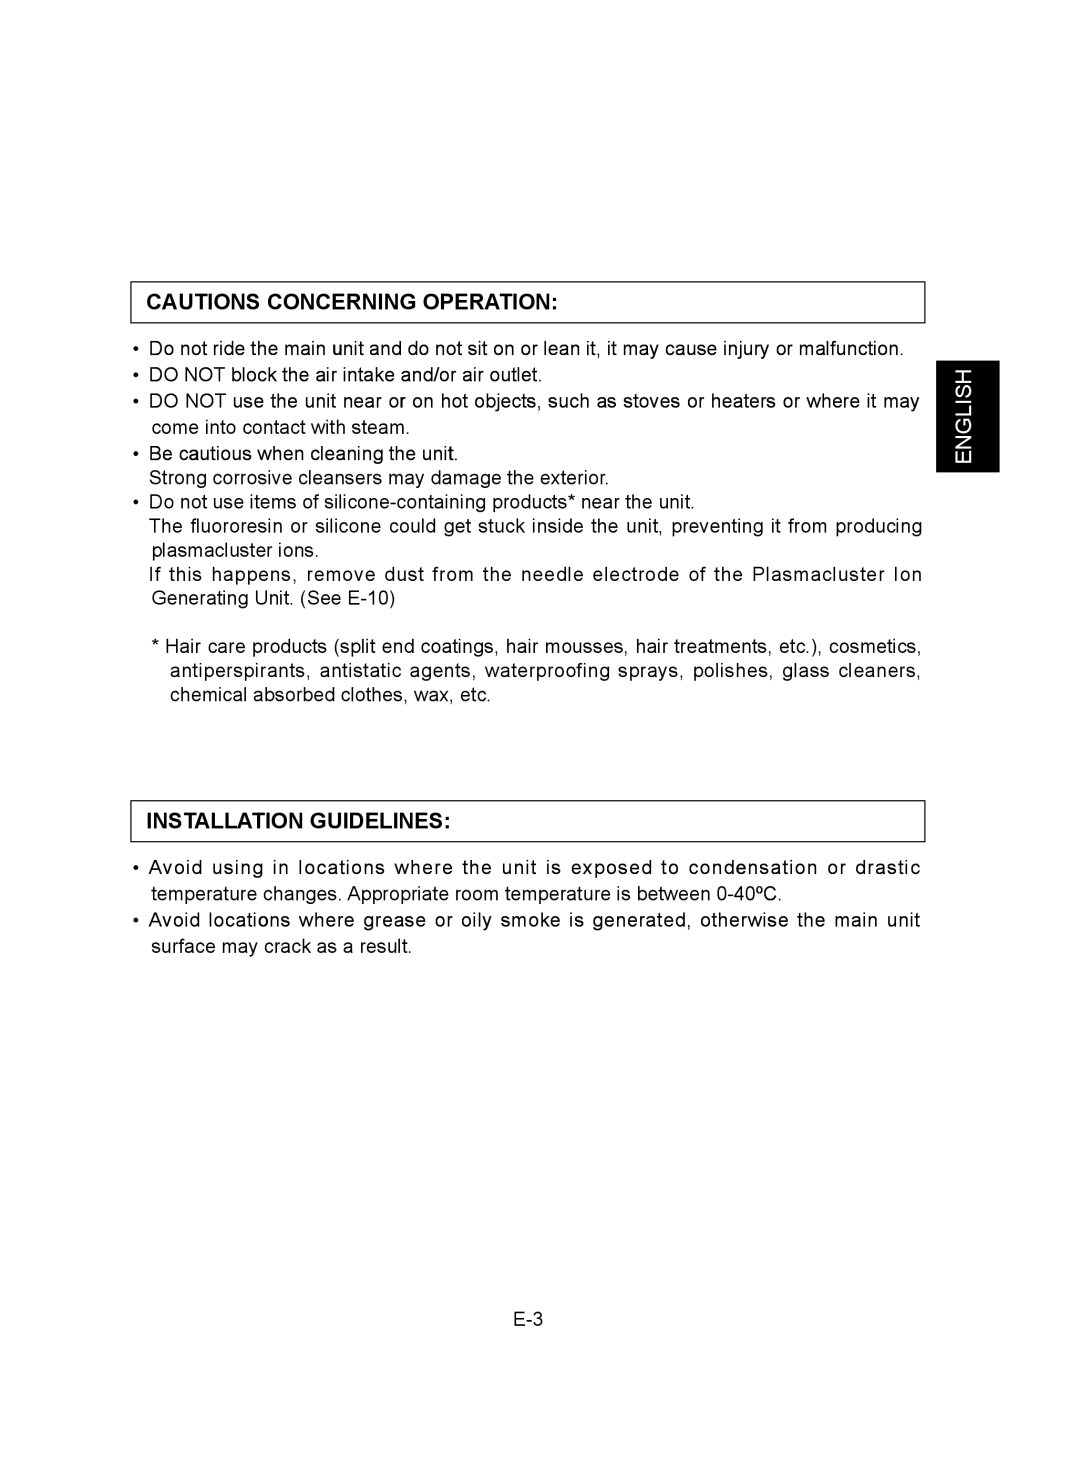 Sharp IG-CH2J operation manual Cautions Concerning Operation, Installation Guidelines, English 